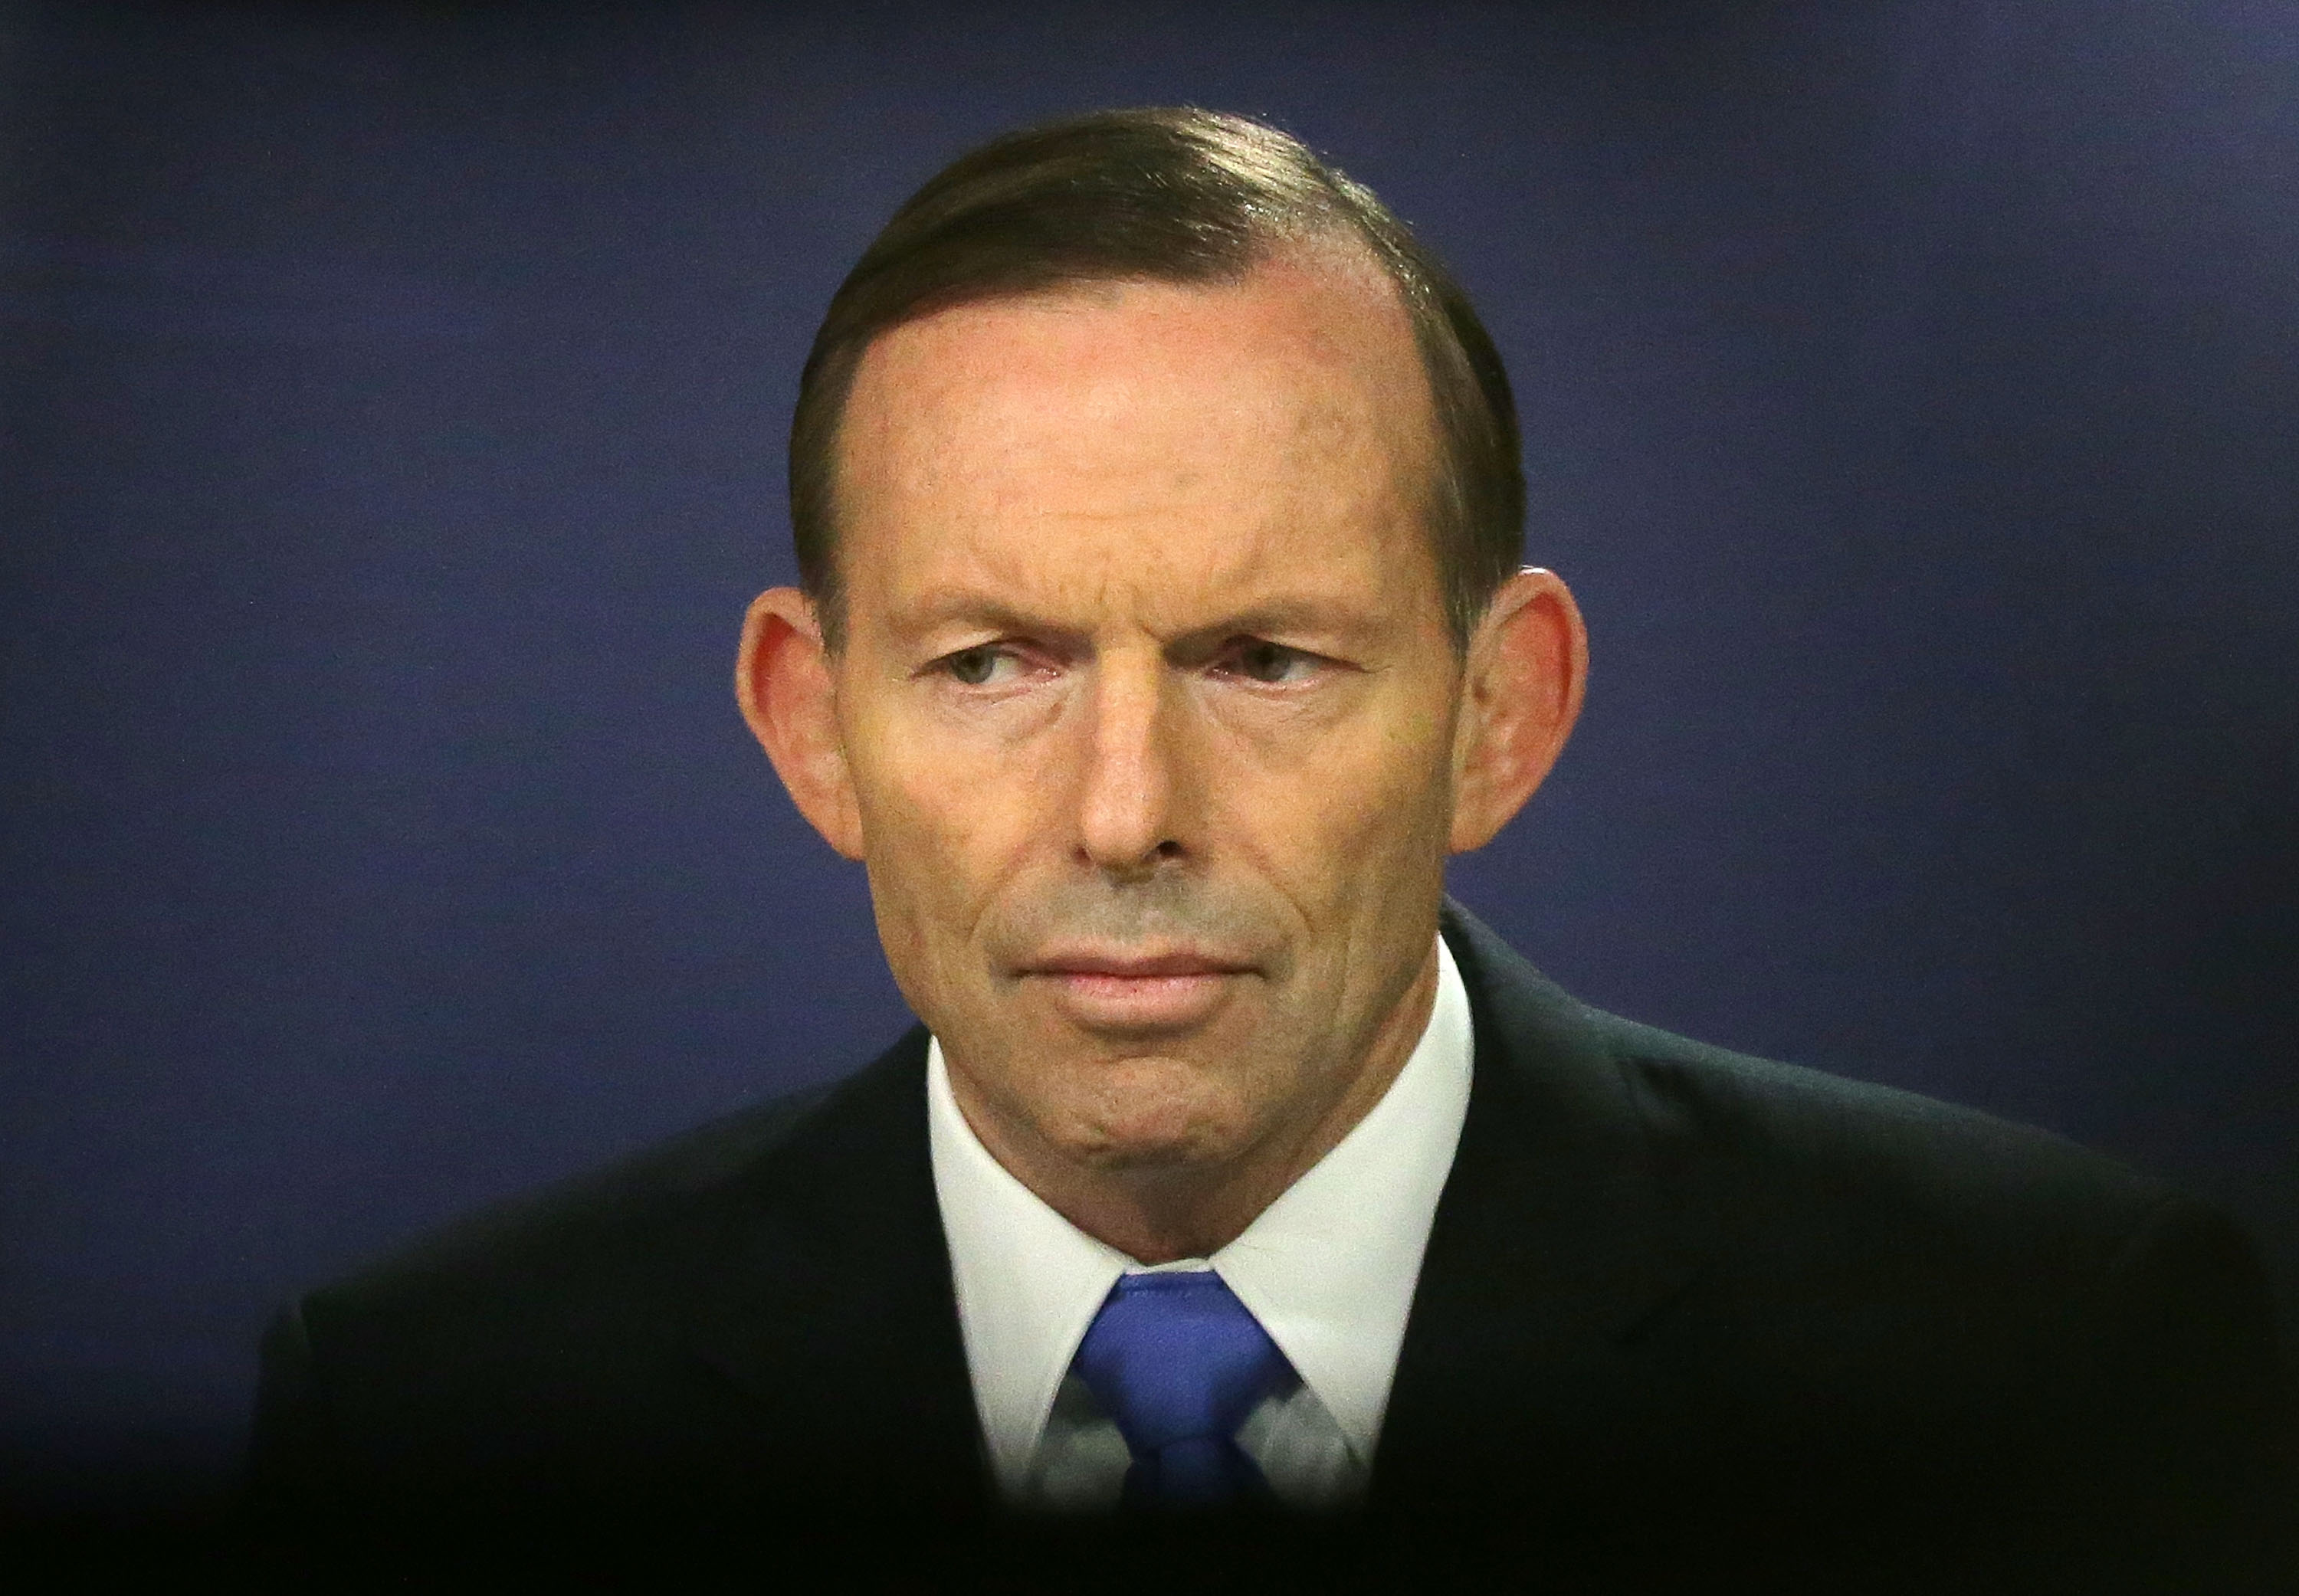 Prime Minister Tony Abbott speaks to the media at Sydney Commonwealth Parliamentary Offices on September 19, 2014 in Sydney, Australia. (Mark Metcalfe—Getty Images)